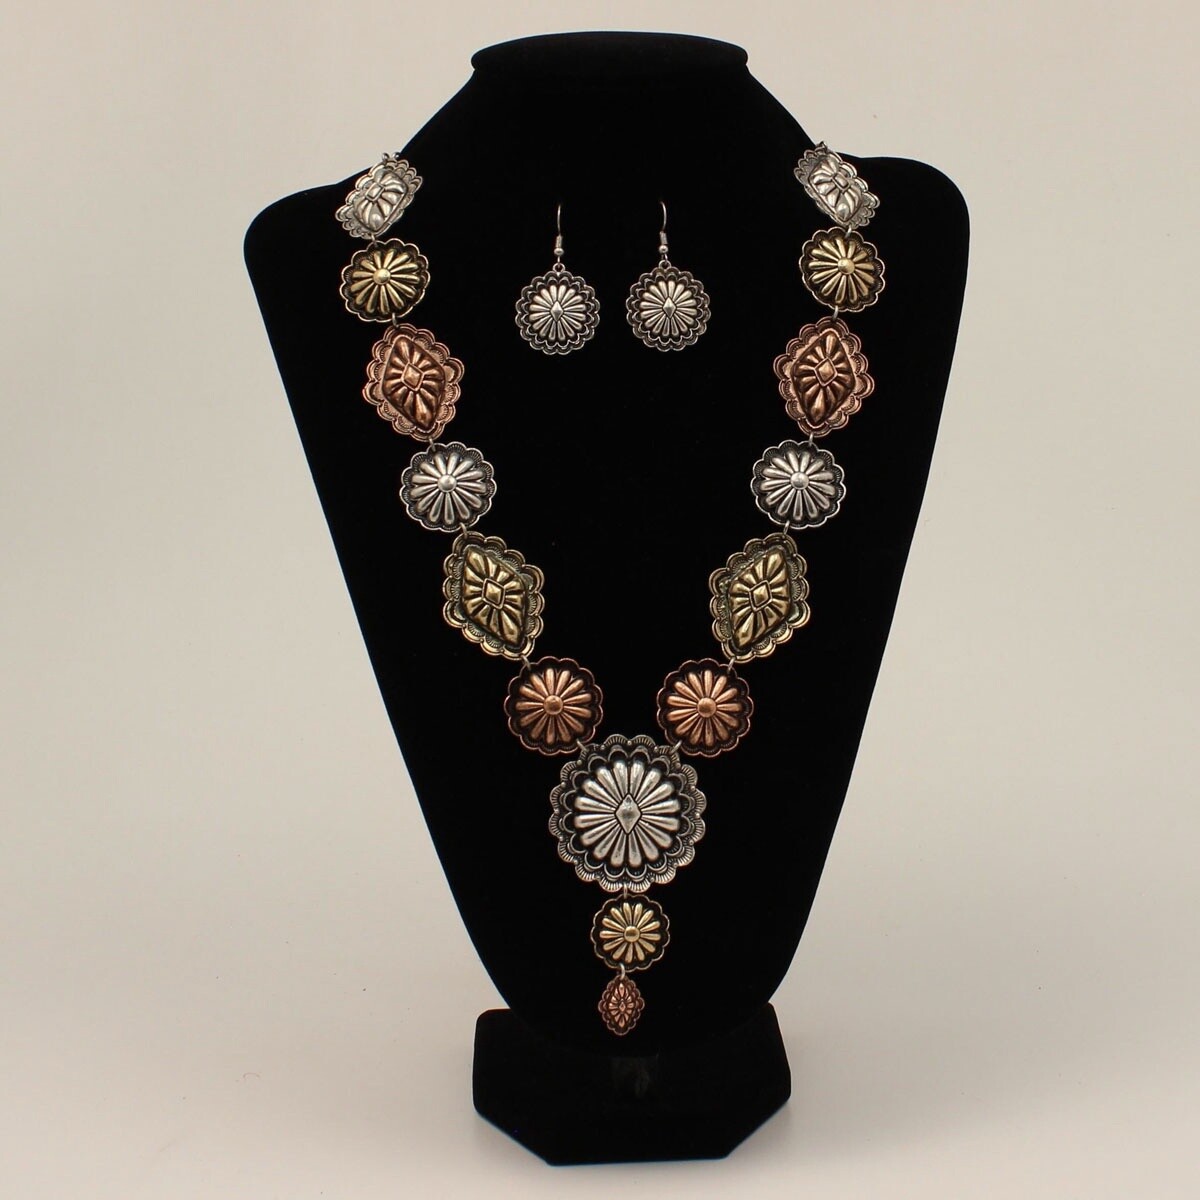 SILVER STRIKE NECKLACE AND EARRING SET FLOWER CONCHO SILVER GOLD COPPER